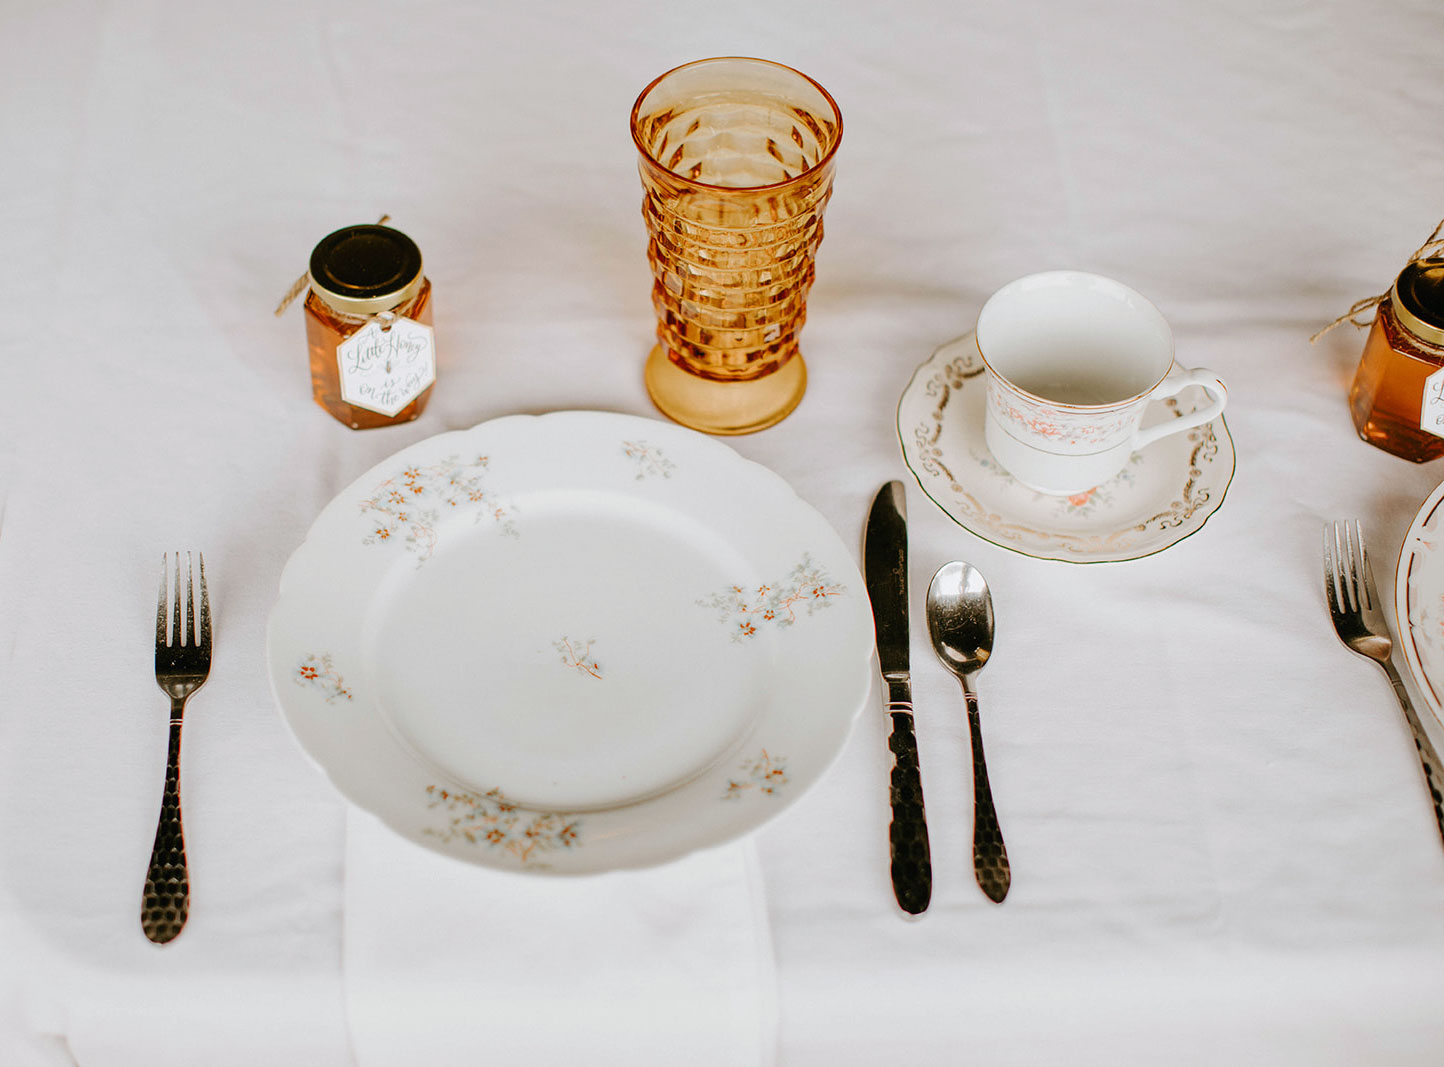 "Sweet As Honey" Themed Baby Shower with mismatched china, amber glass, and lace